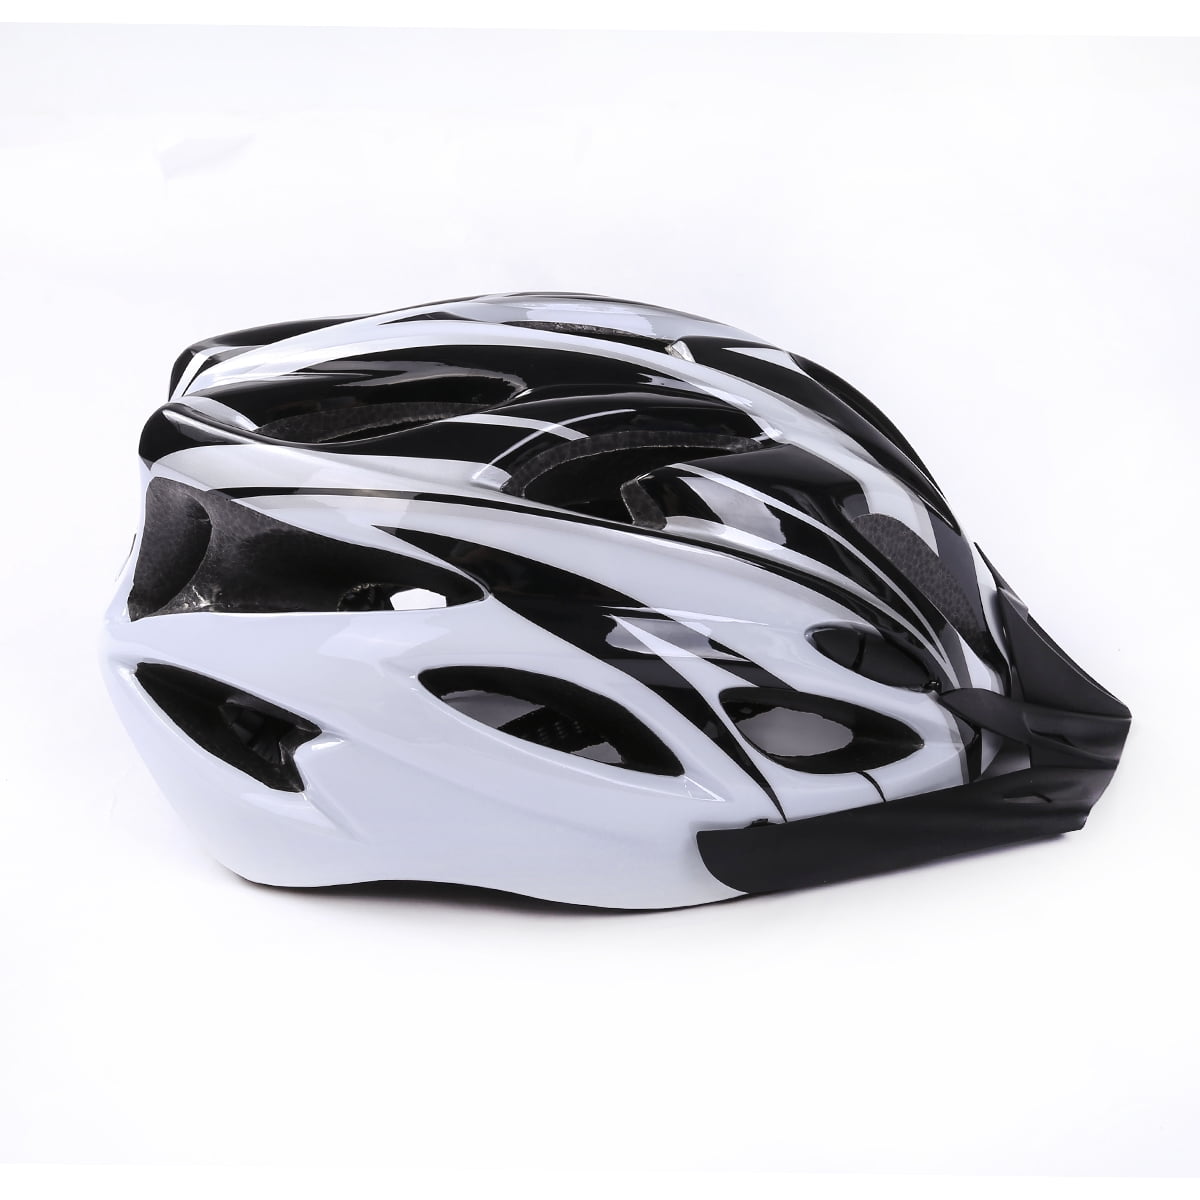 Unisex Adult Bike Helmets, Adjustable Size Road Bicycle Helmet Safety Riding Helmet for Riding Road Cycling Mountain